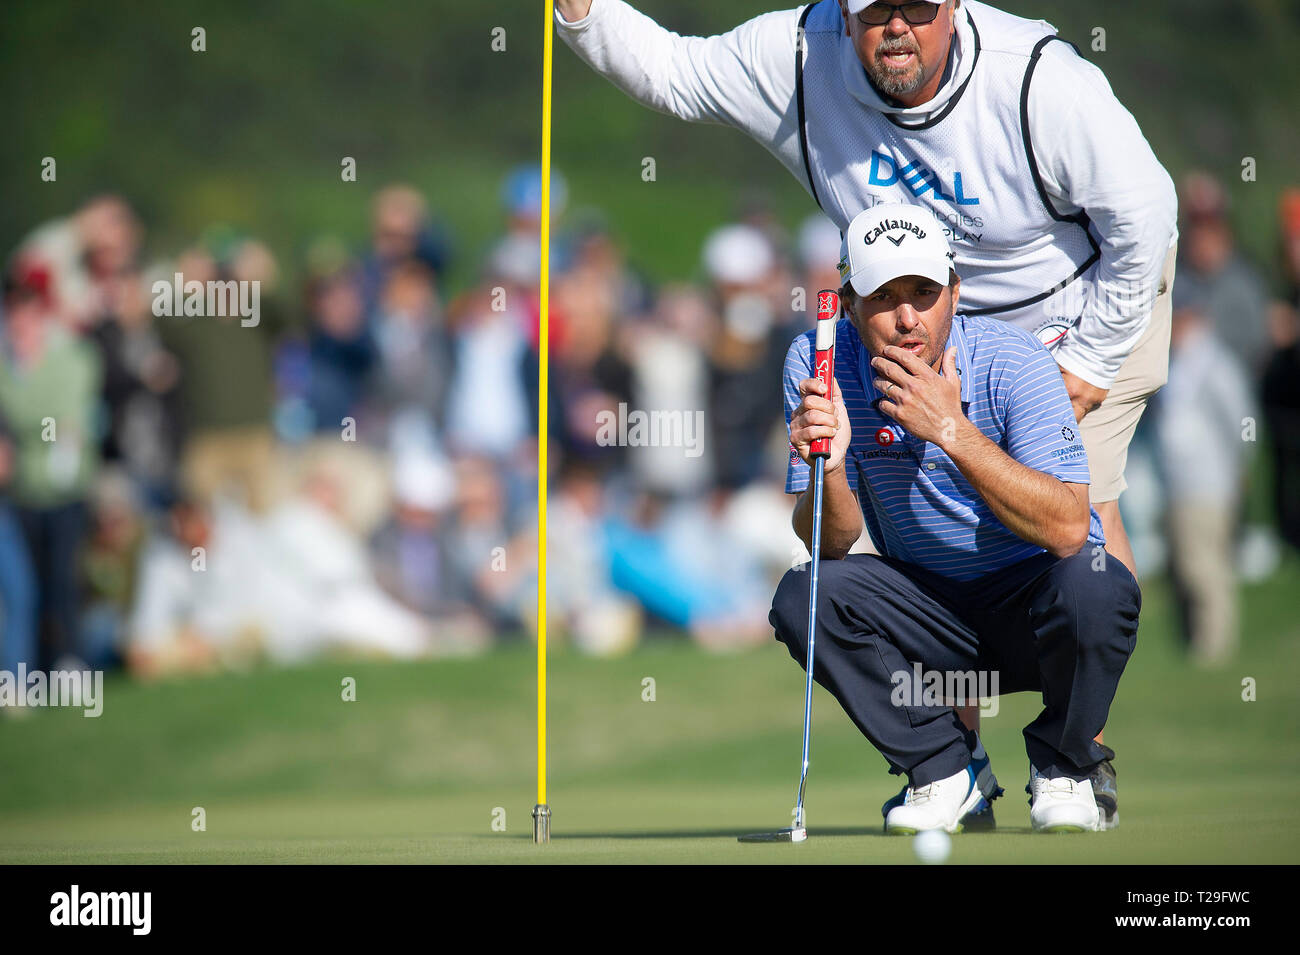 March 31, 2019: Kevin Kisner and caddie Duane Bock in action Championship  Match at the World Golf Championships ""“ Dell Technologies Match Play,  Austin Country Club. Austin, Texas. Mario Cantu/CSM Stock Photo - Alamy